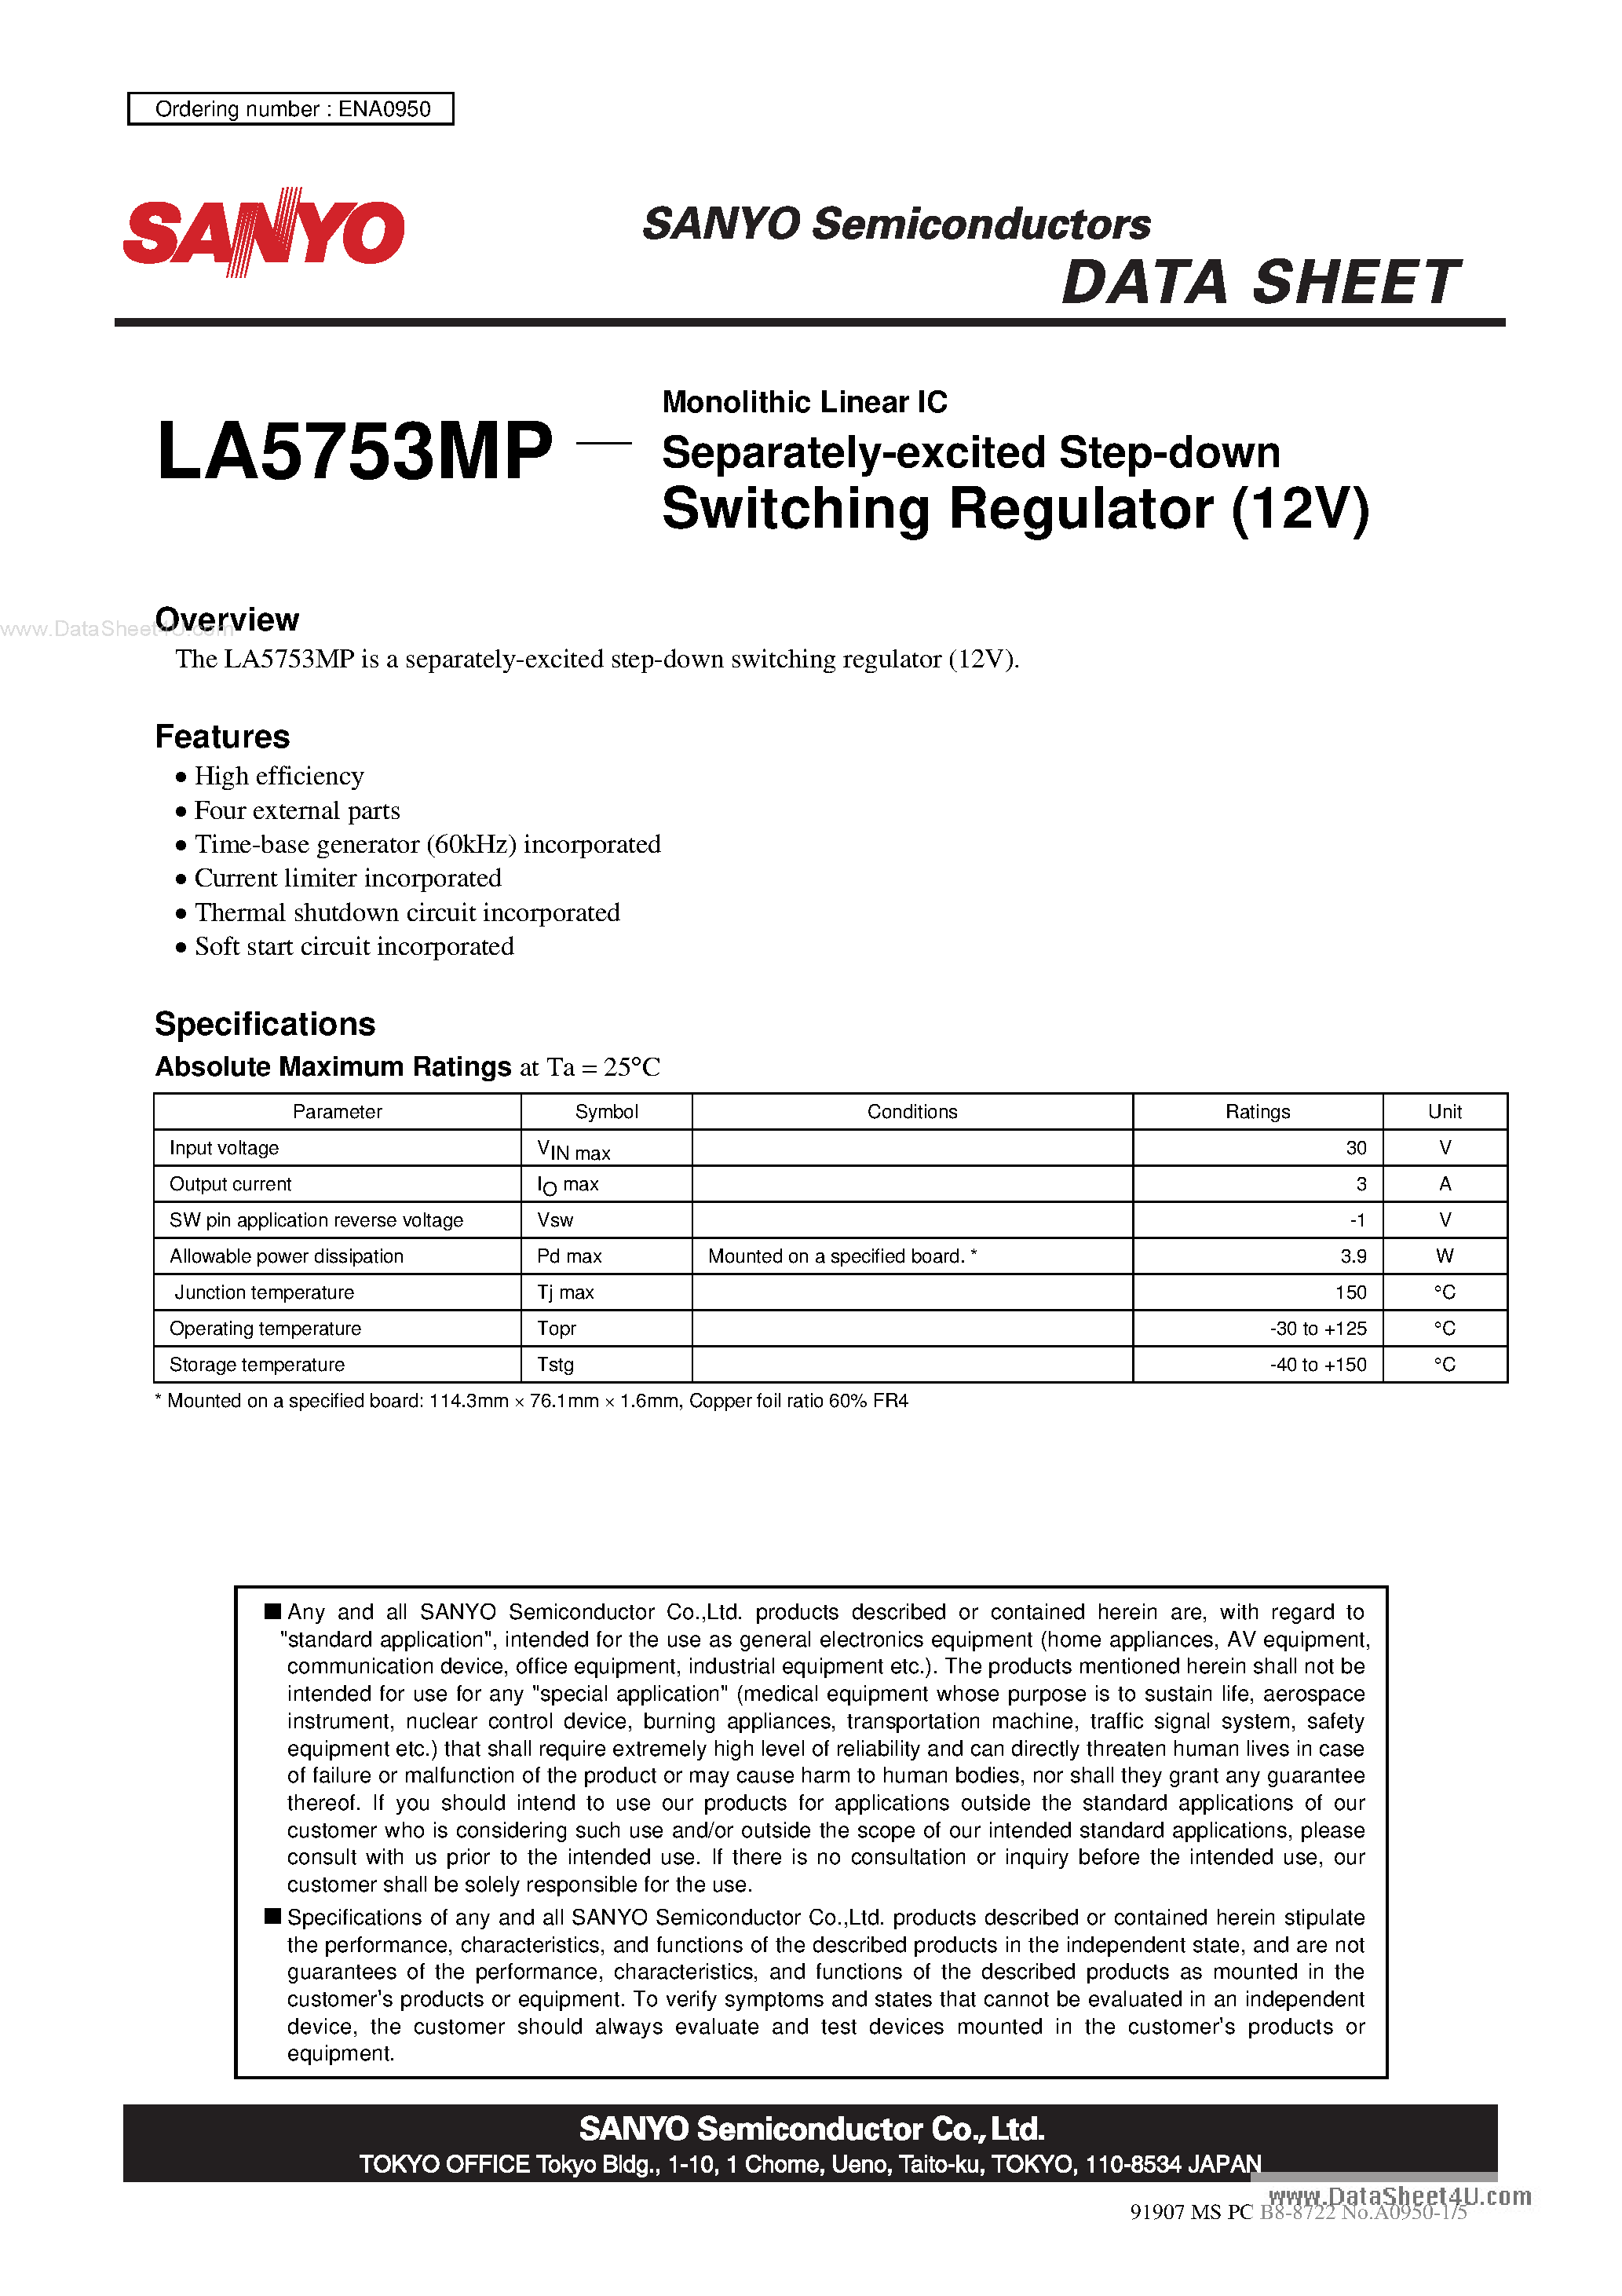 Даташит LA5753MP - Monolithic Linear IC Separately-Excited Step-Down Switching Regulator страница 1